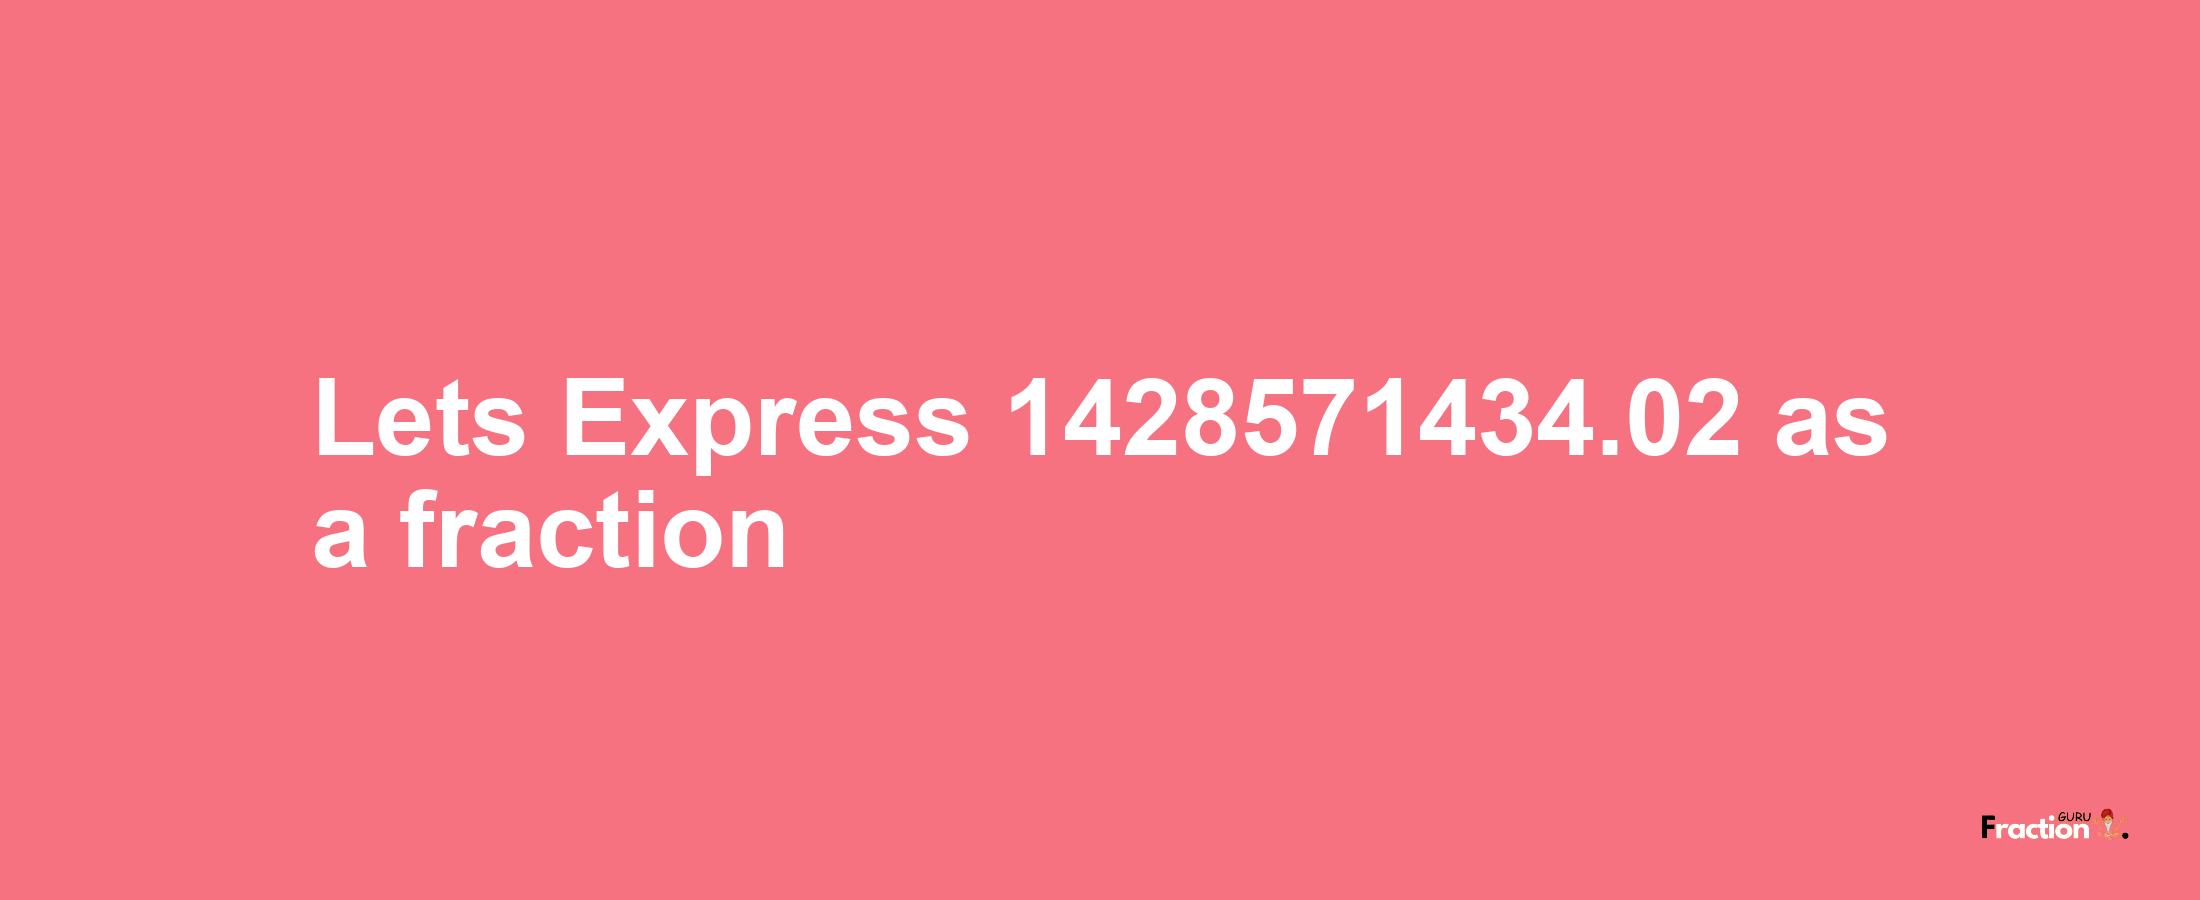 Lets Express 1428571434.02 as afraction